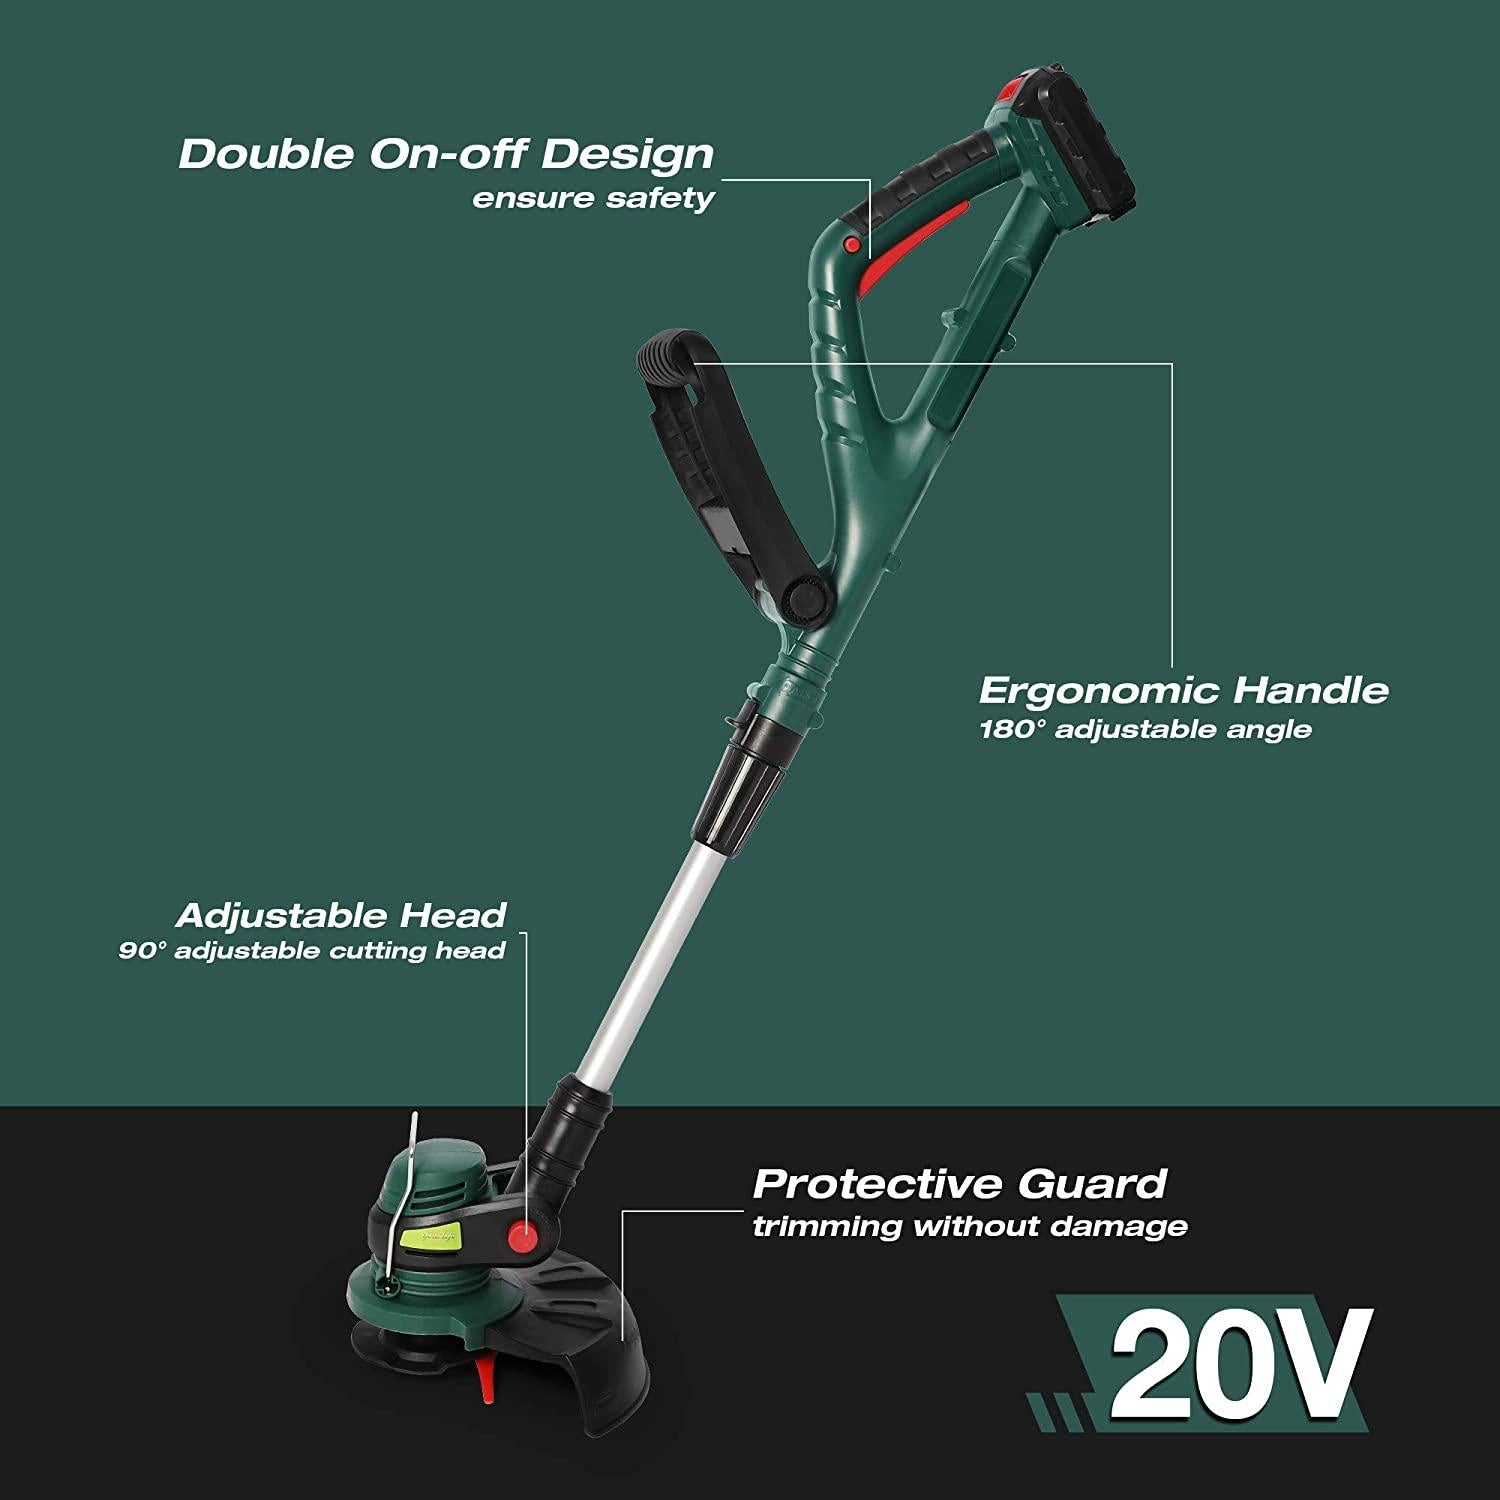 Cordless String Trimmer/Edger, 10” Electric Garden Weed Eater with 20V/2.0 AH Battery and Charge - Bosonshop